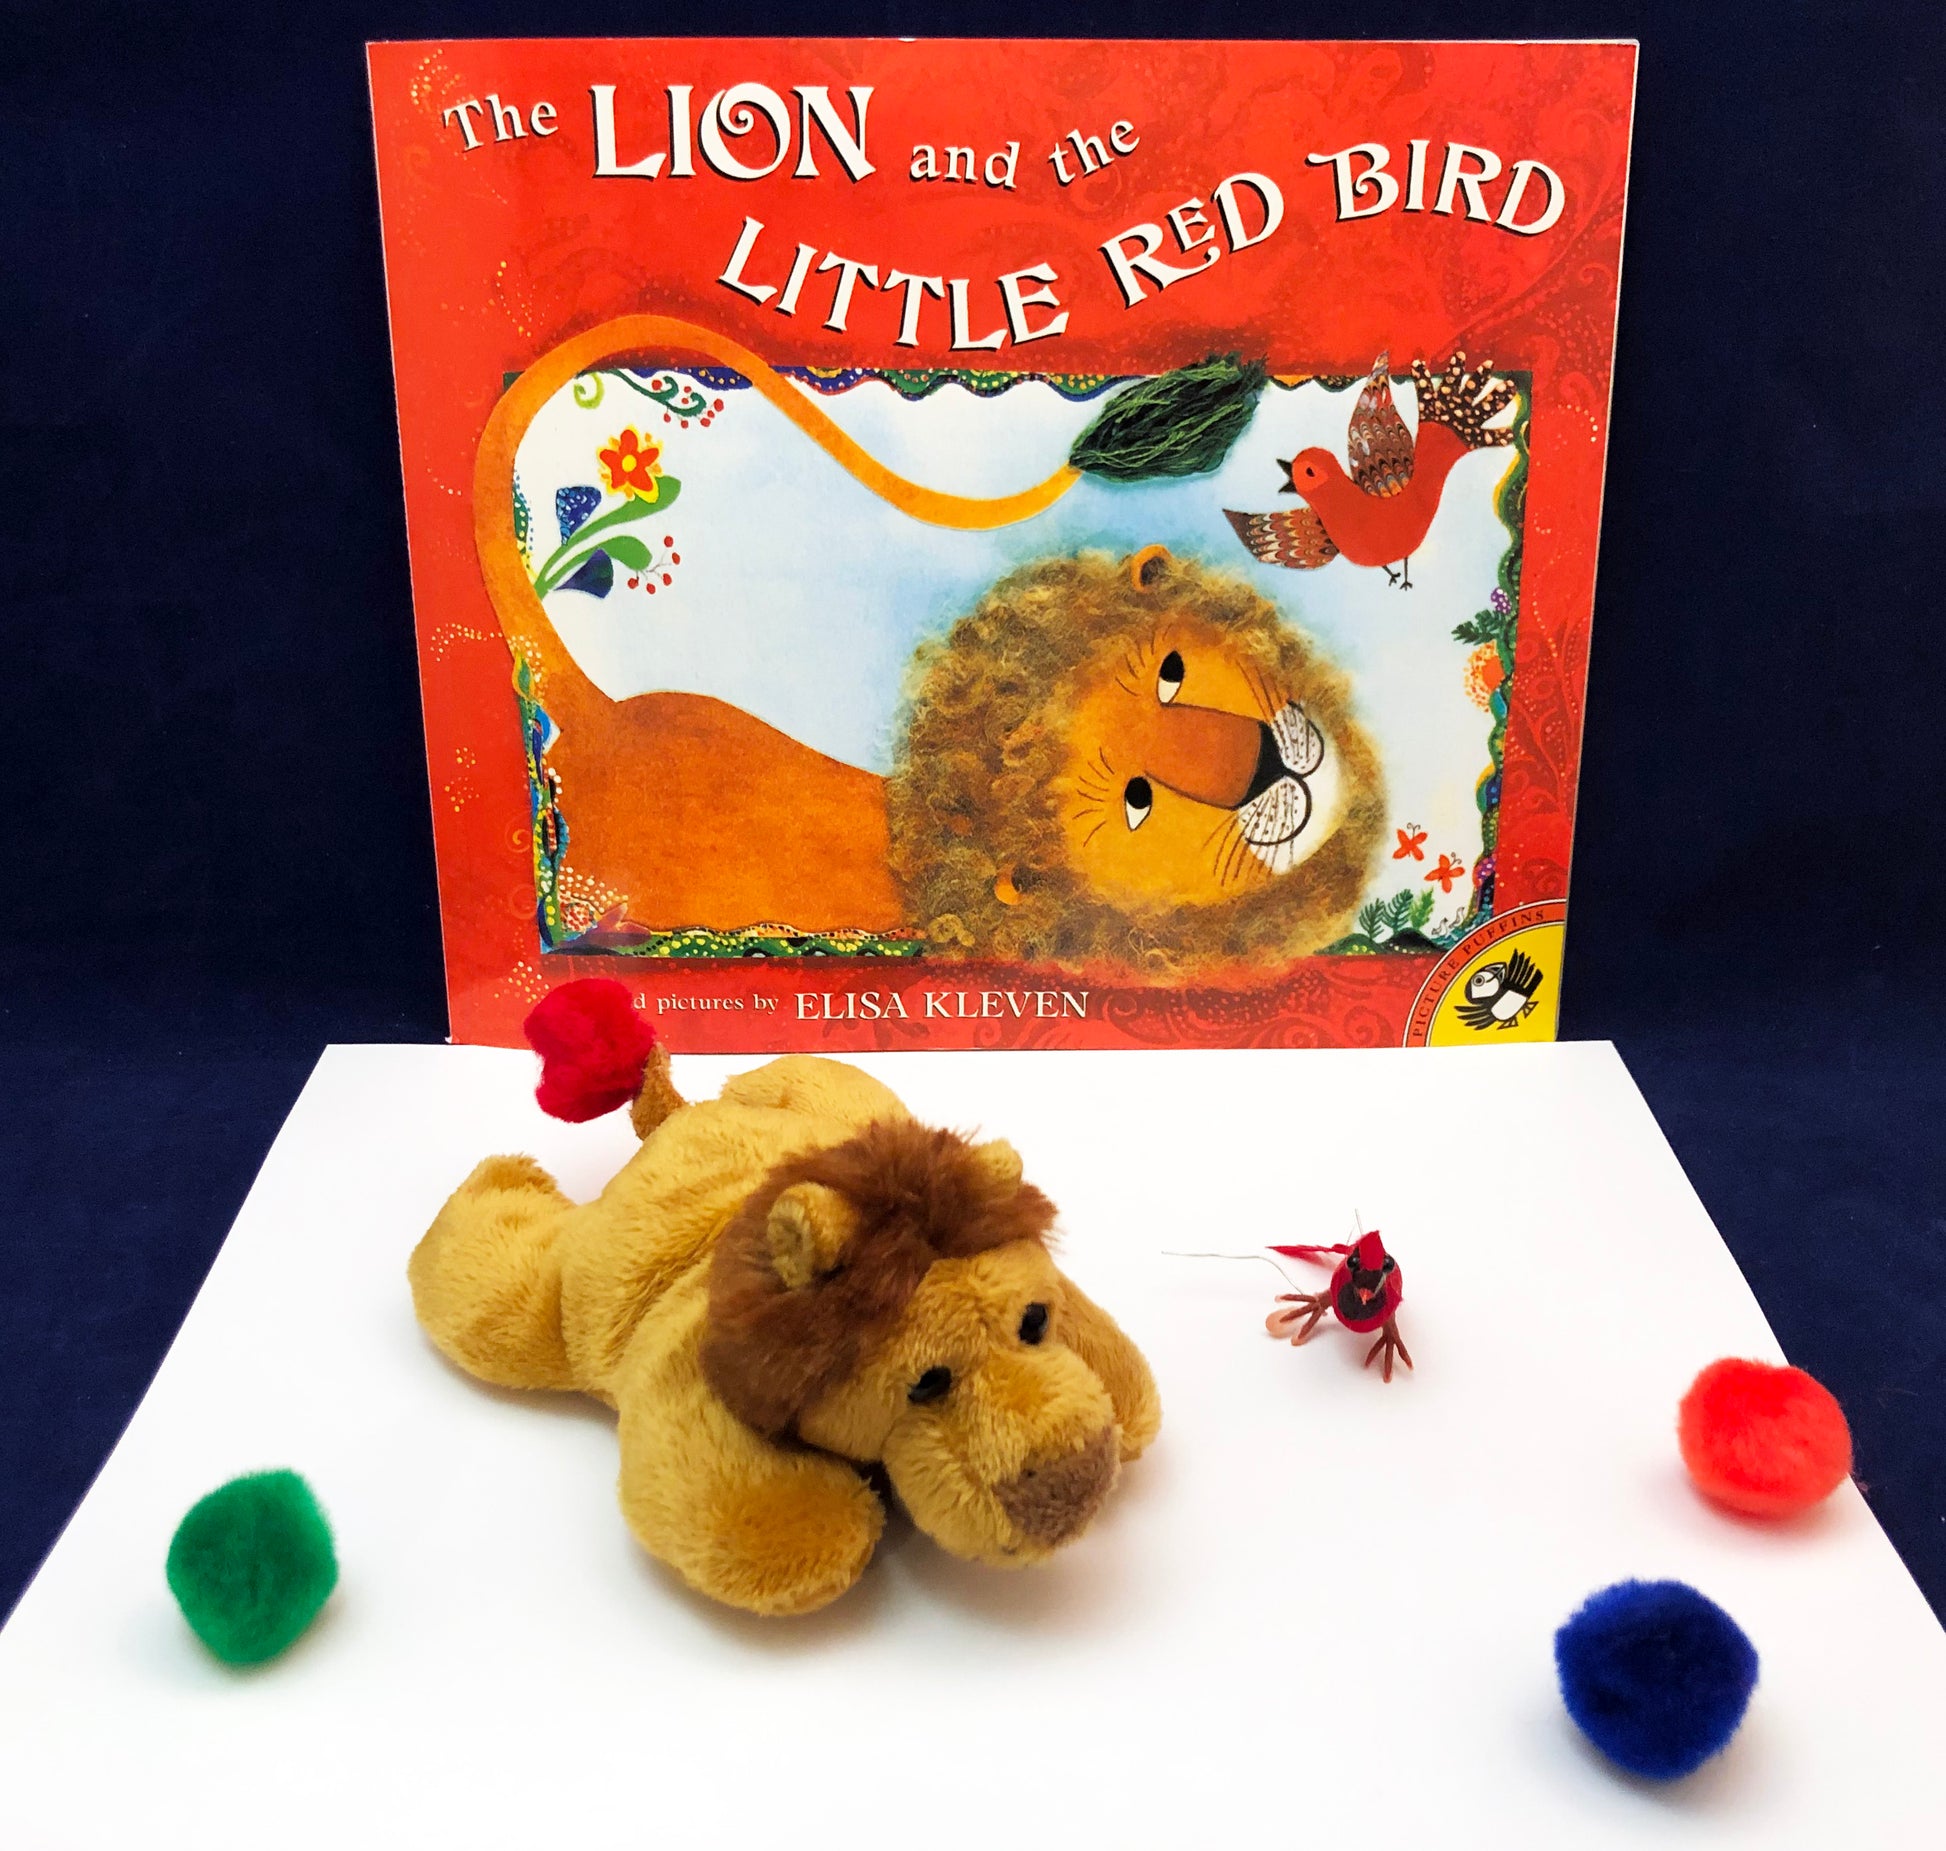 Activities inspired by the Lion and the Little Red Bird